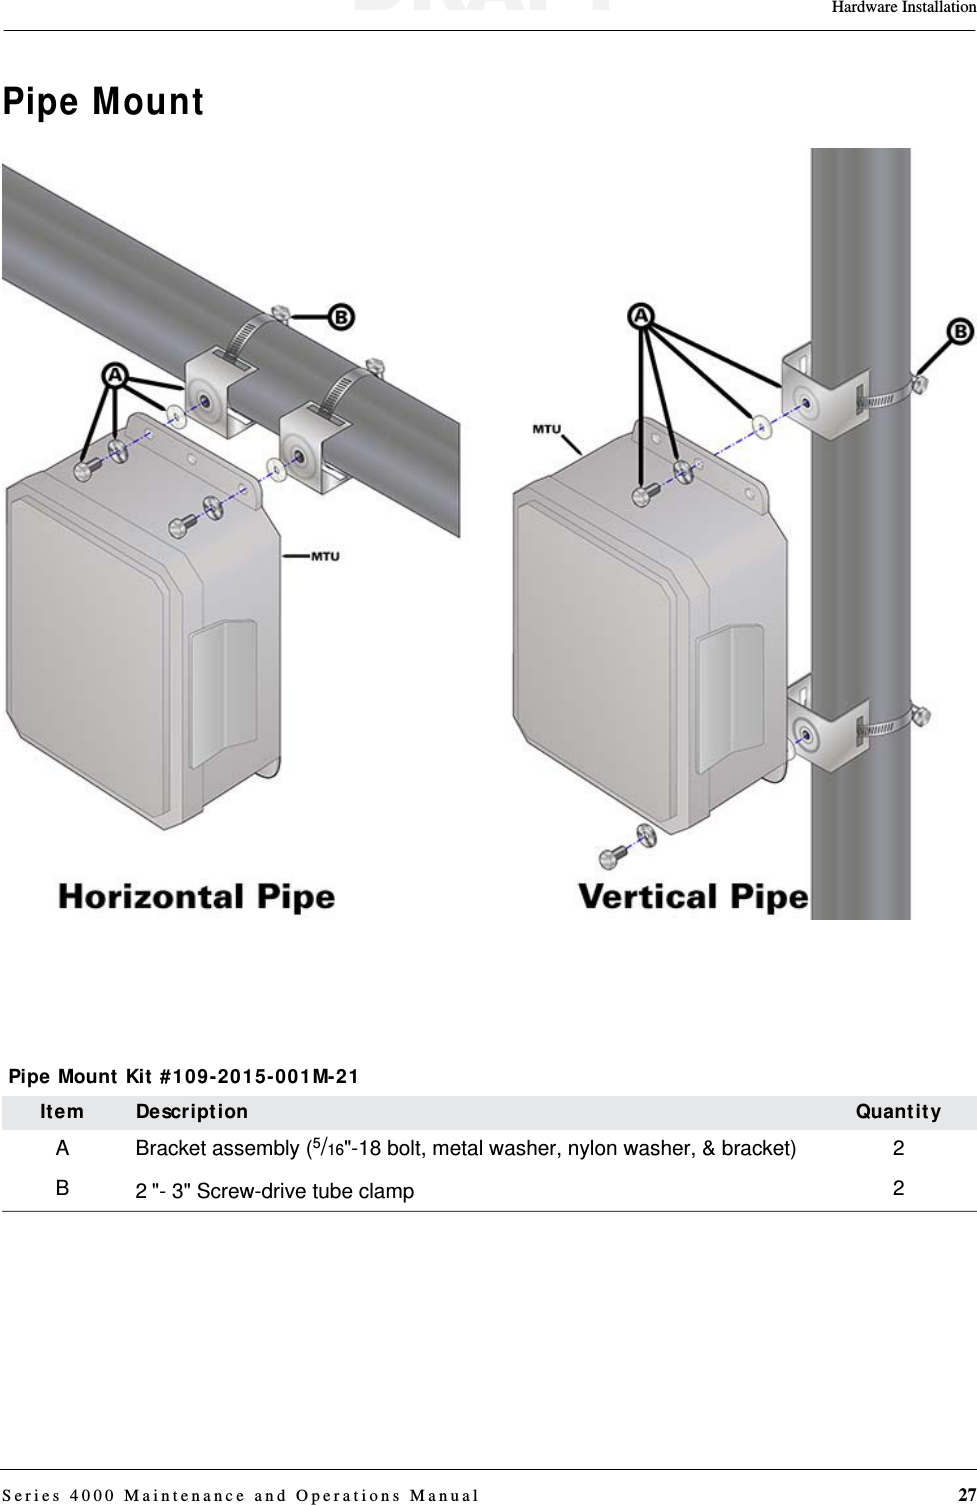 Hardware InstallationSeries 4000 Maintenance and Operations Manual 27Pipe MountPipe Mount Kit #109-2015-001M-21 Item Description QuantityABracket assembly (5/16&quot;-18 bolt, metal washer, nylon washer, &amp; bracket) 2B2 &quot;- 3&quot; Screw-drive tube clamp 2DRAFT